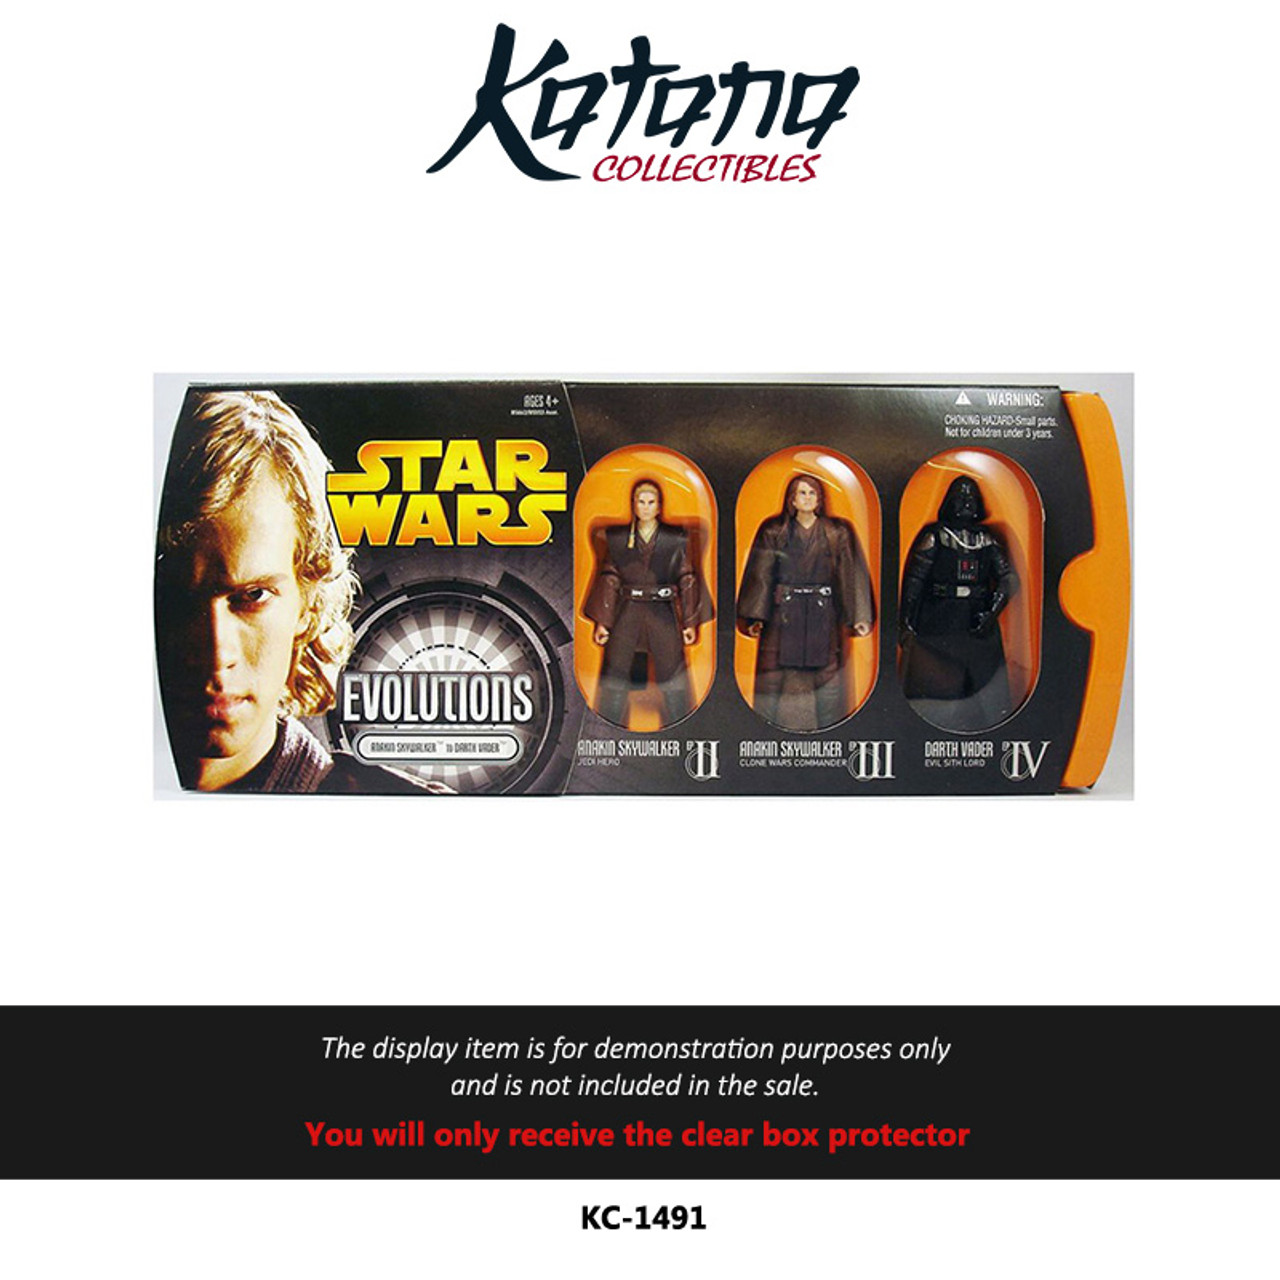 Katana Collectibles Protector For Star Wars Episode III (Revenge of the Sith) - Hasbro - Evolutions : Anakin Skywalker to Darth Vader